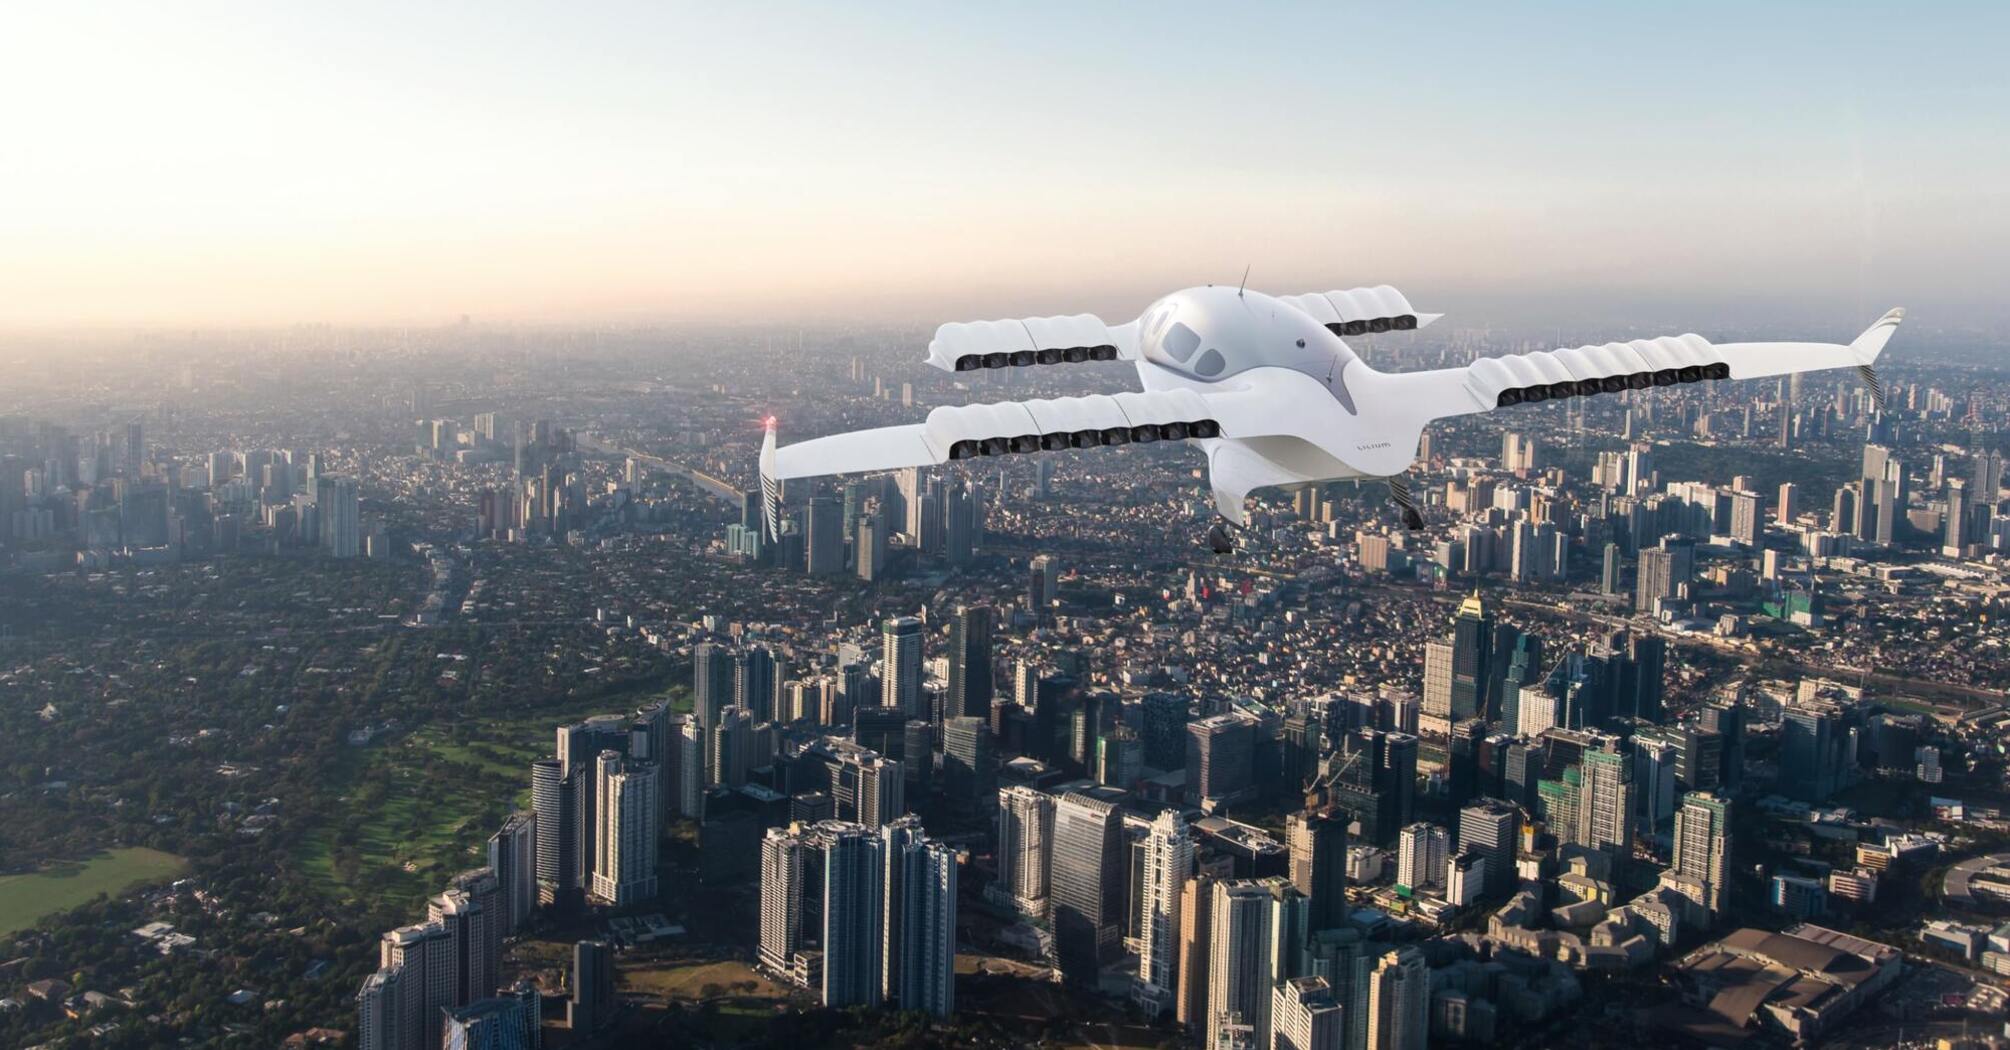 Saudi Arabia introduces flying taxis for pilgrims to Mecca